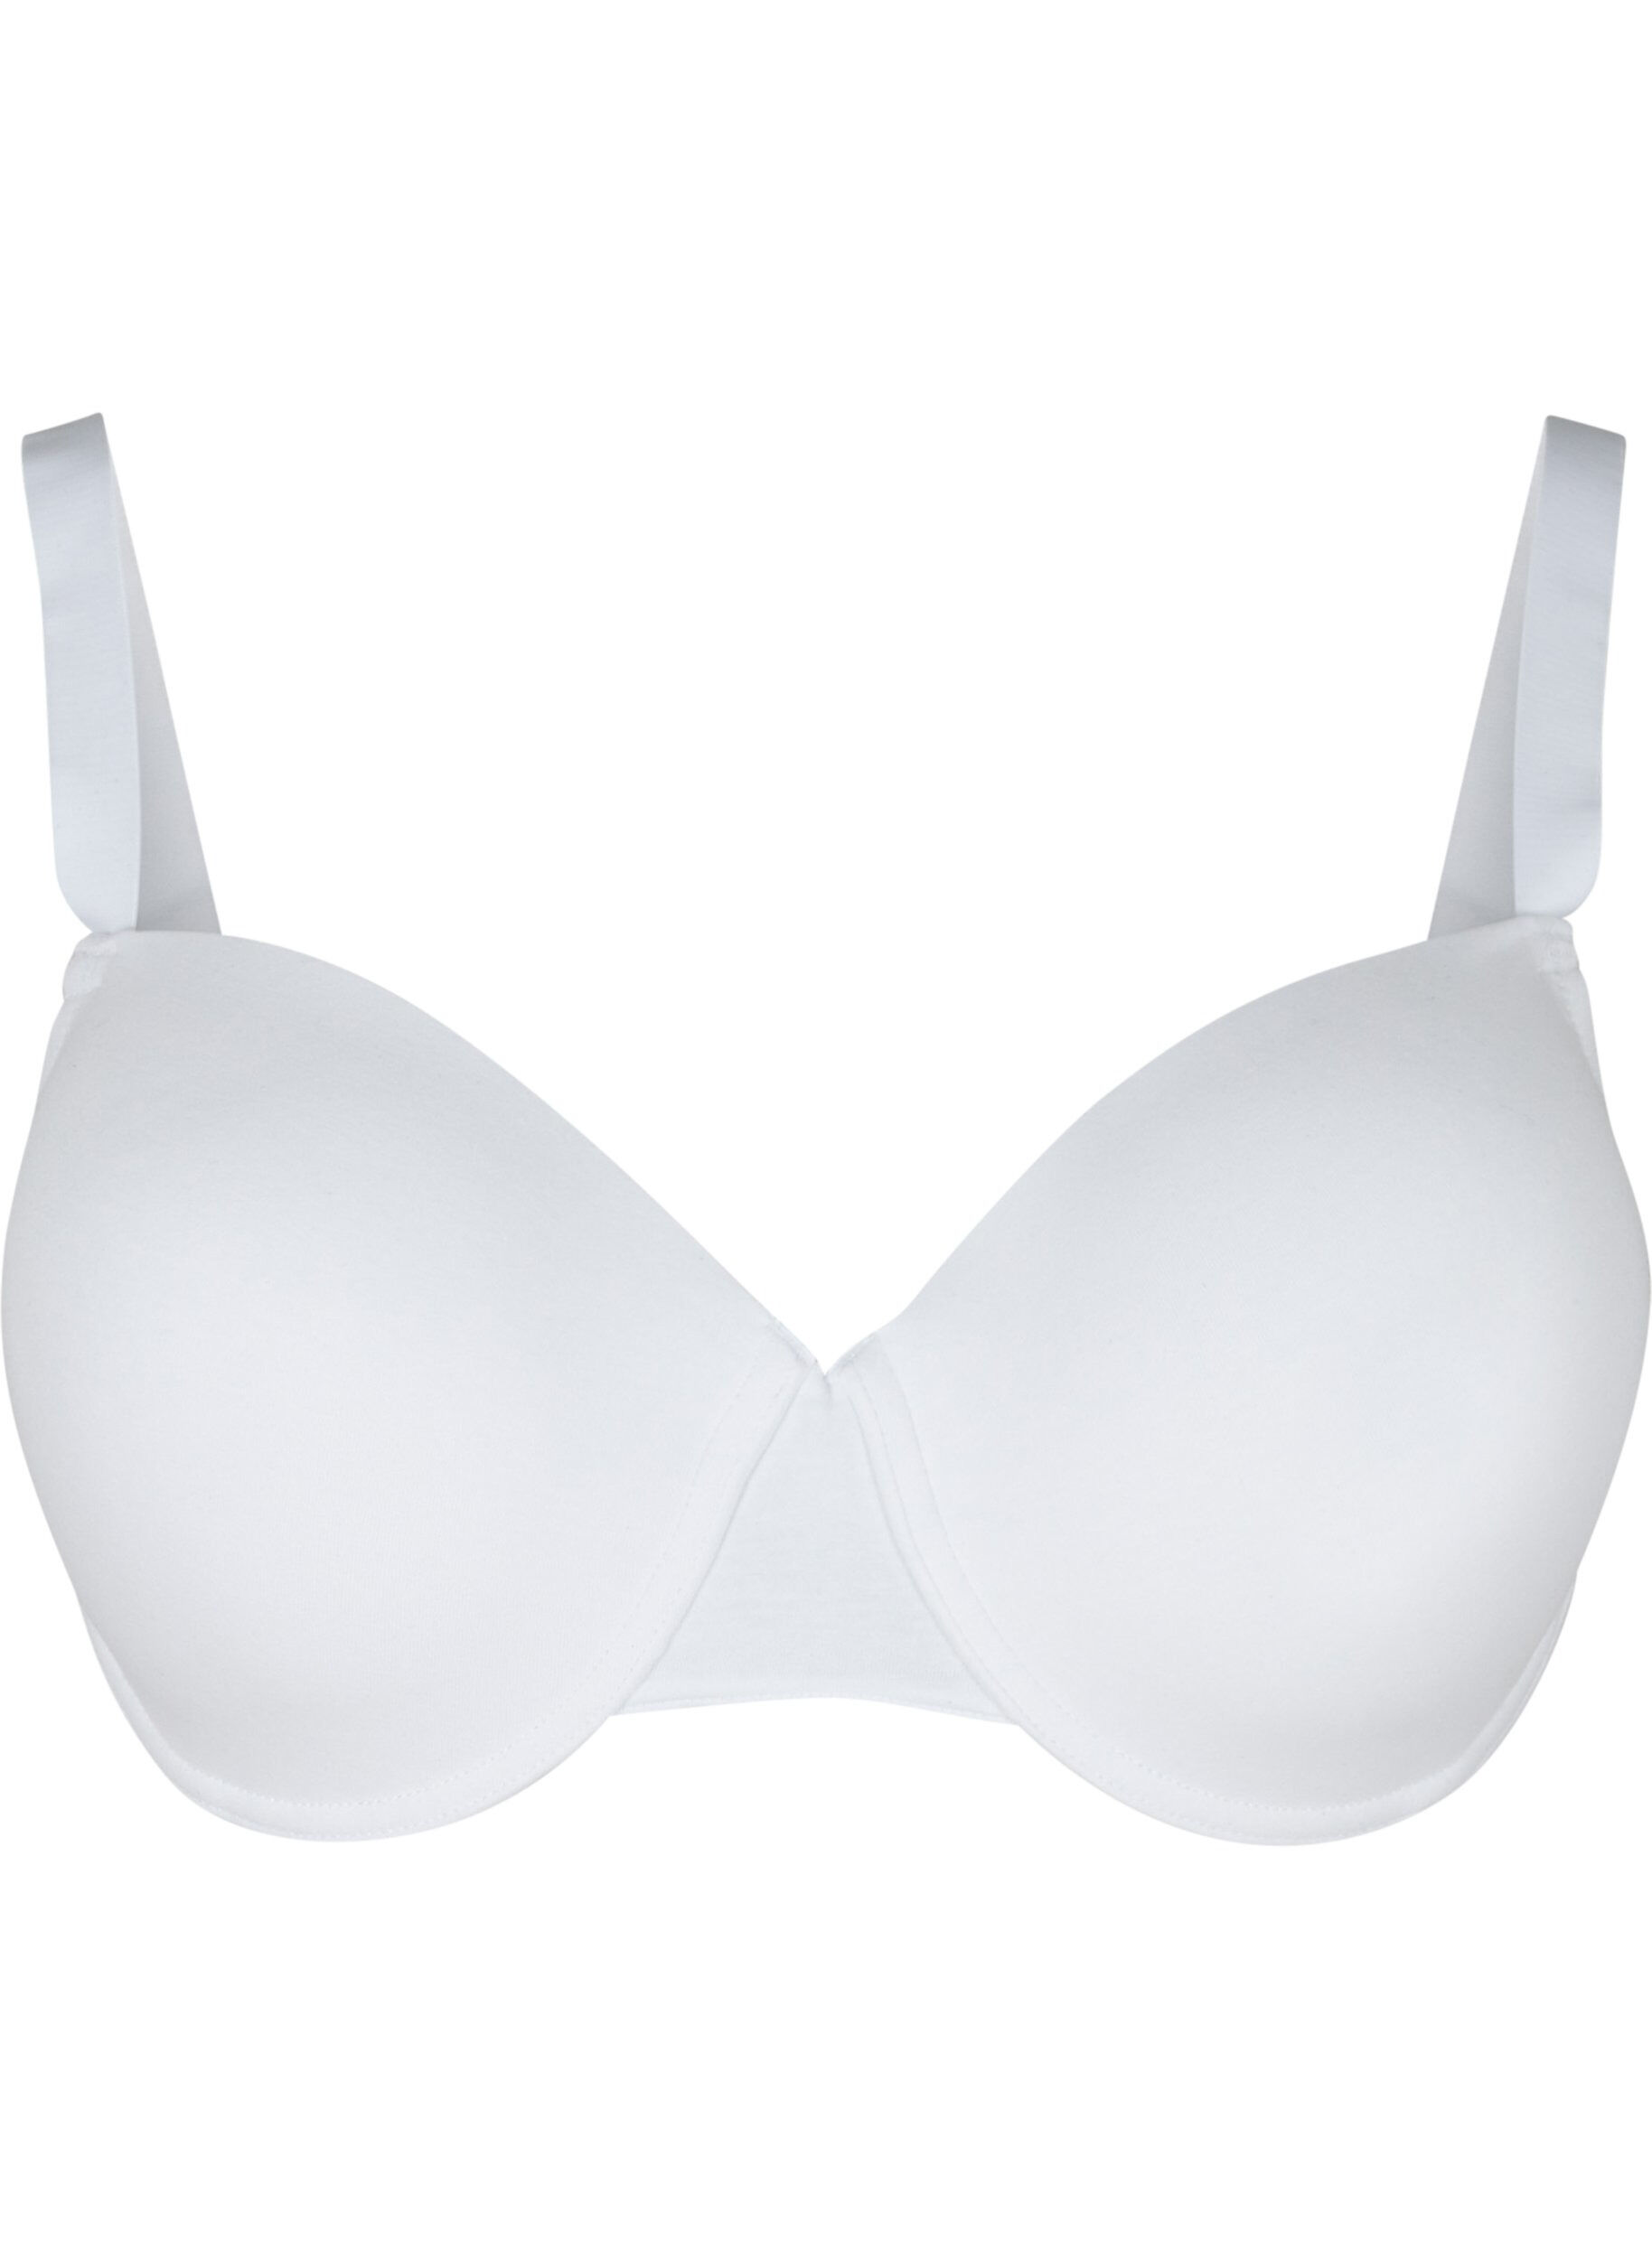 Bra with moulded cups and underwire - White - Sz. 85E-115H 